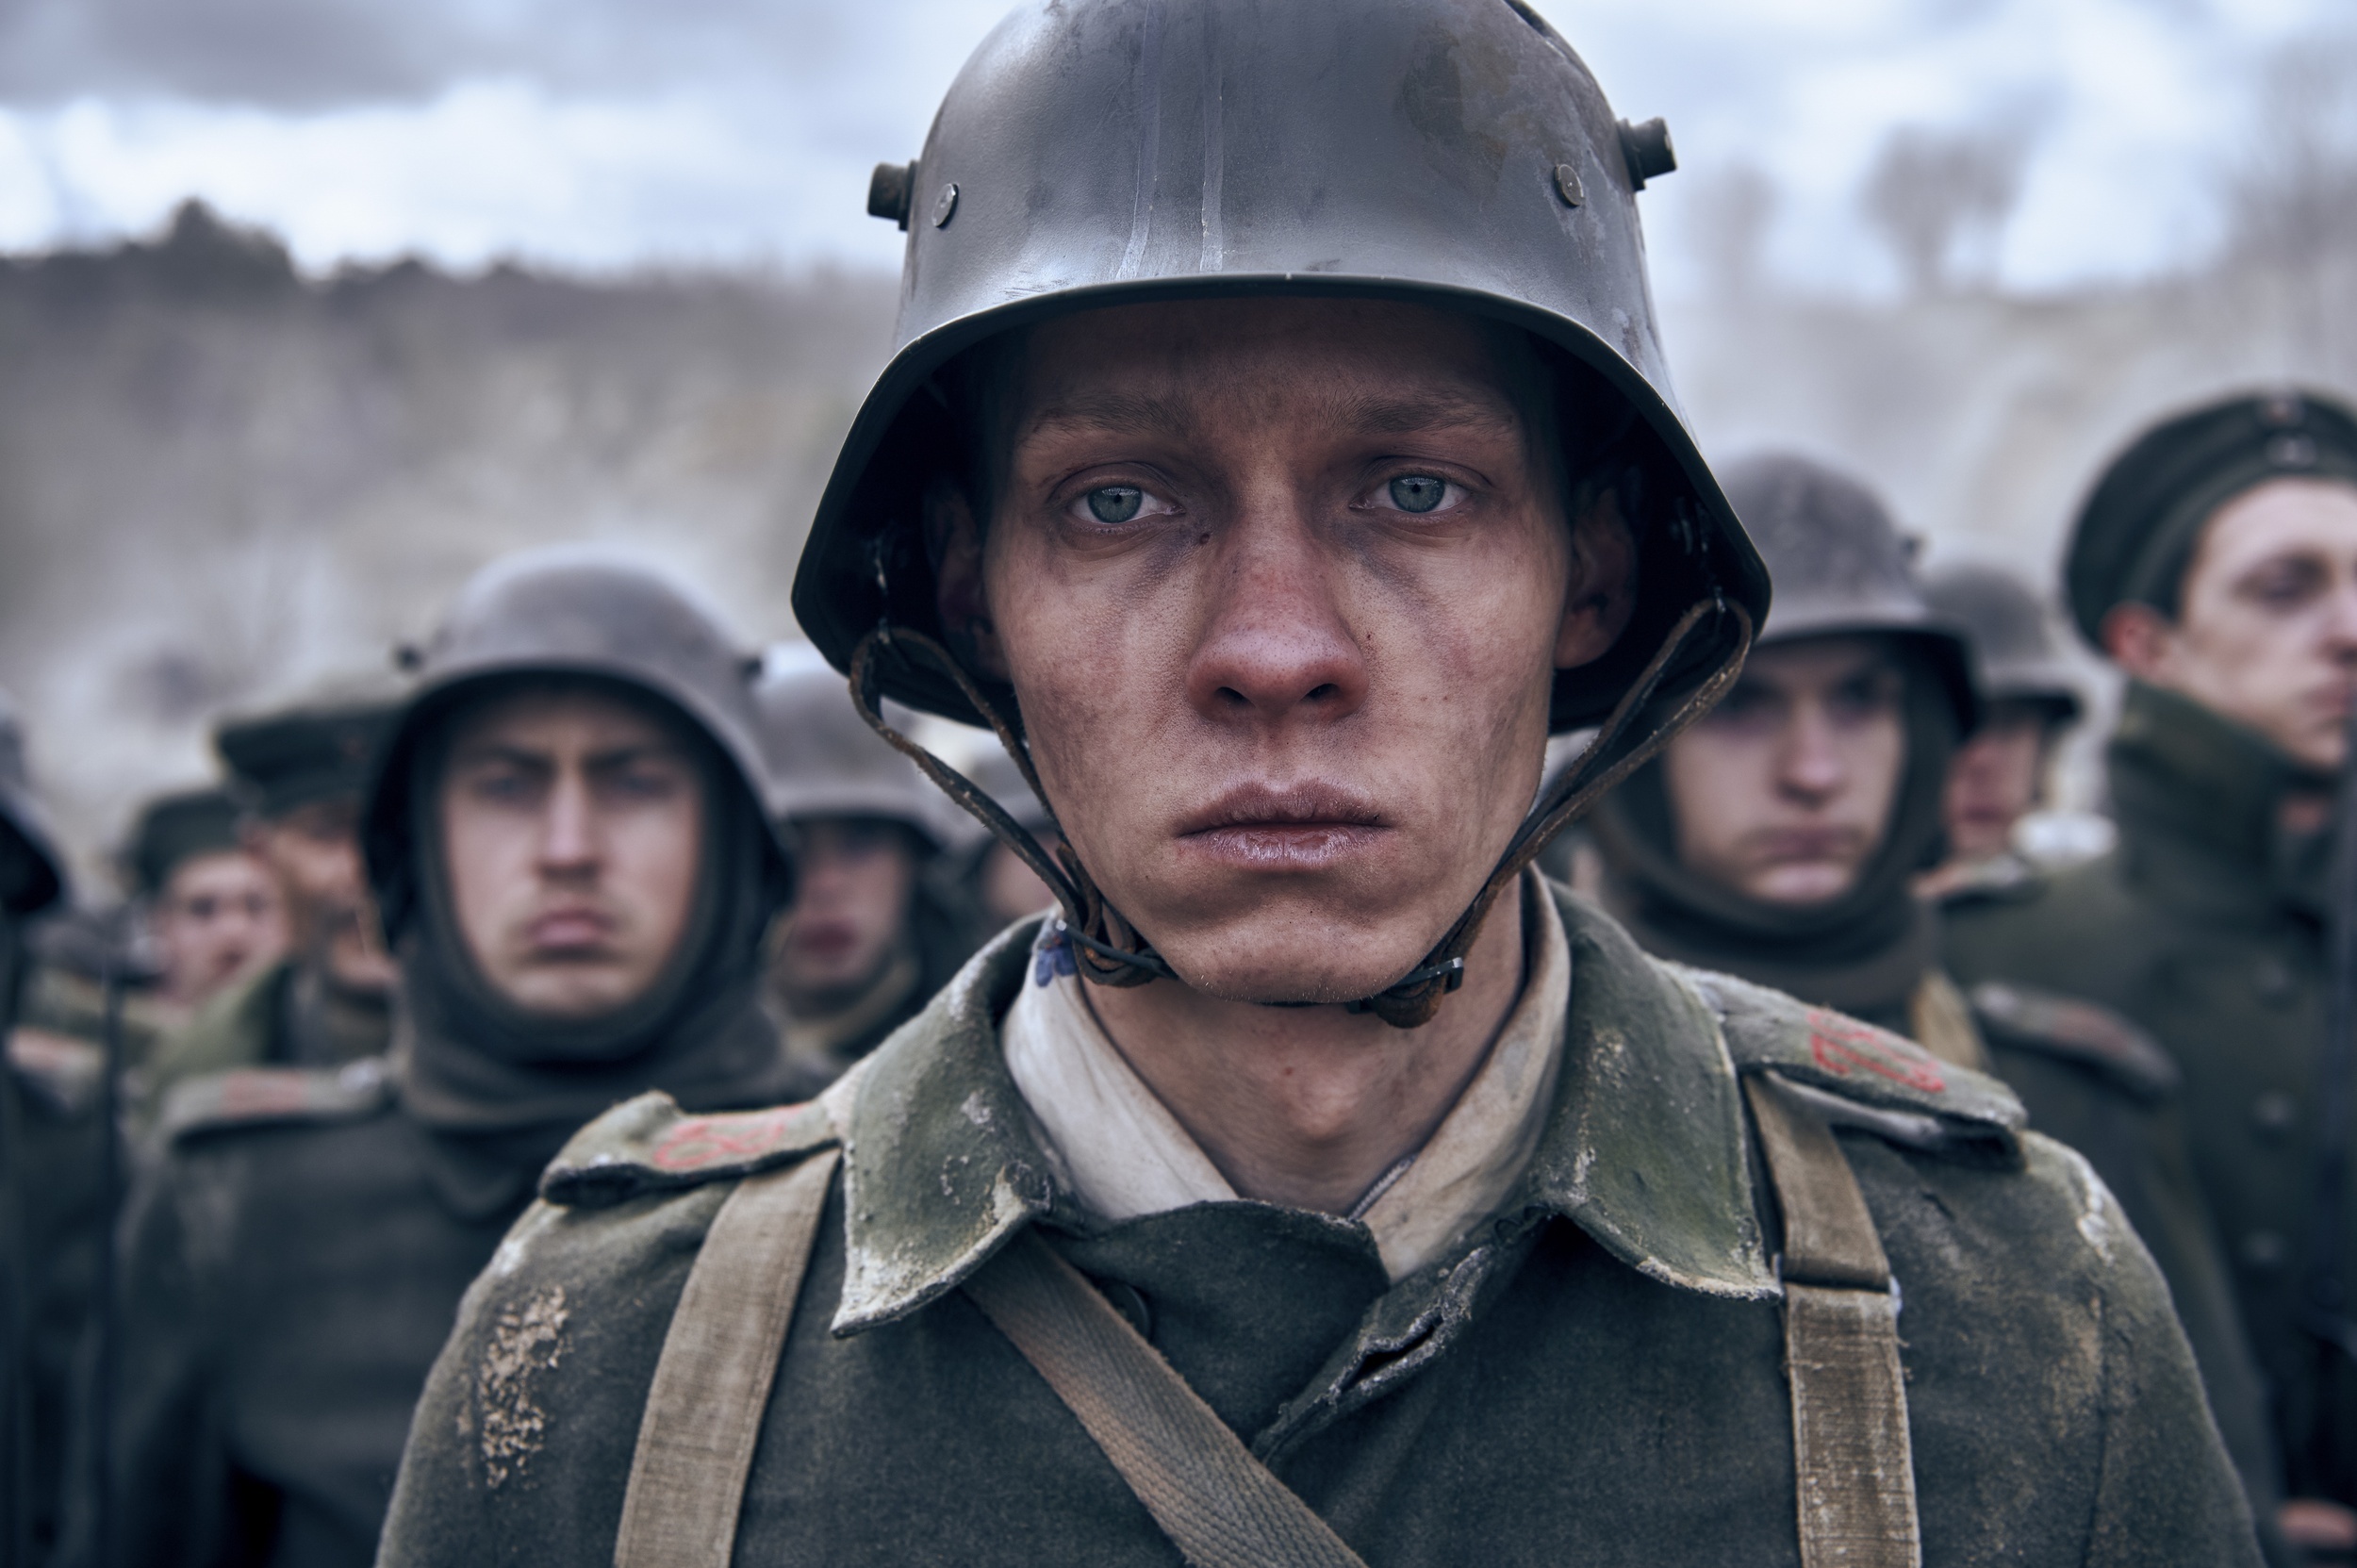 <p>The 2022 adaptation of <em>All Quiet on the Western Front</em> is one of the most haunting and grim war films of all time. It follows a young German soldier during World War I who is initially excited by the idea of fighting for his country. However, he learns the true horror and bleakness of war on the battlefield. The gritty battle scenes and piercing music almost feel like an assault on the senses, genuinely immersing the viewer in the war experience and highlighting the human cost of it all. </p><p>You may also like: <a href='https://www.yardbarker.com/entertainment/articles/the_ultimate_rush_playlist_022724/s1__34267772'>The ultimate Rush playlist</a></p>